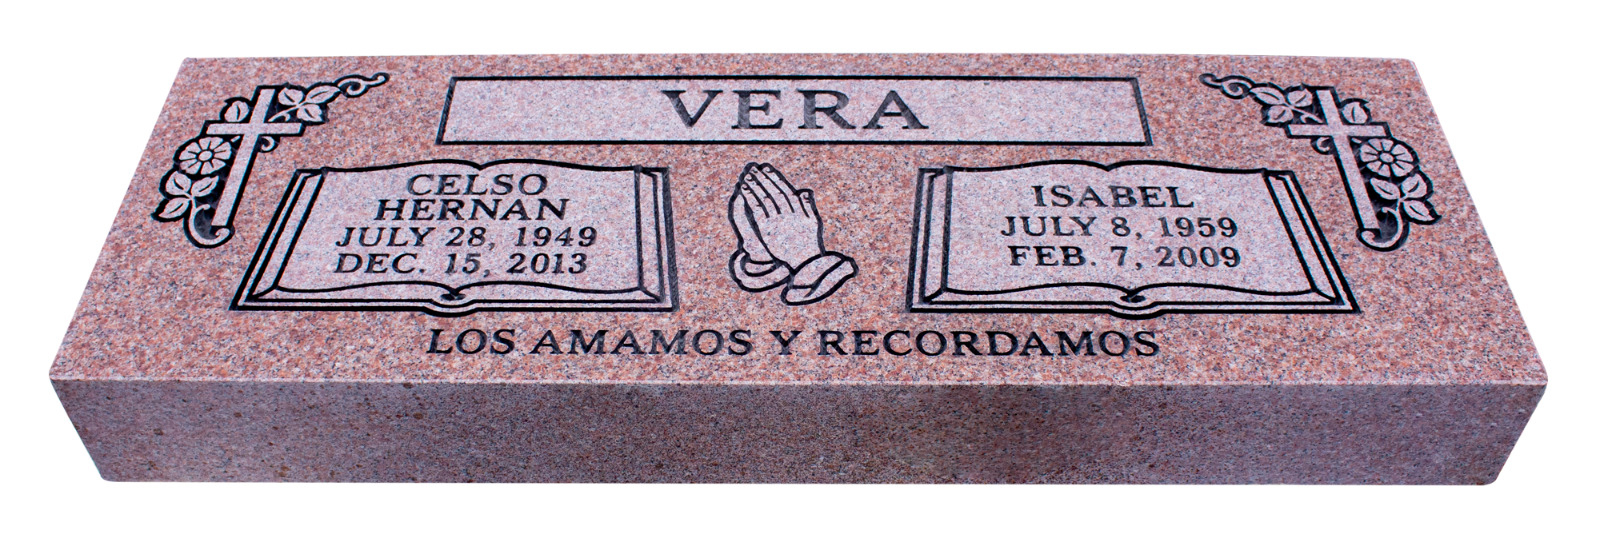 Cemetery Granite Bevel Headstone 36 X 12 X 6" Includes Engraving Free Shipping